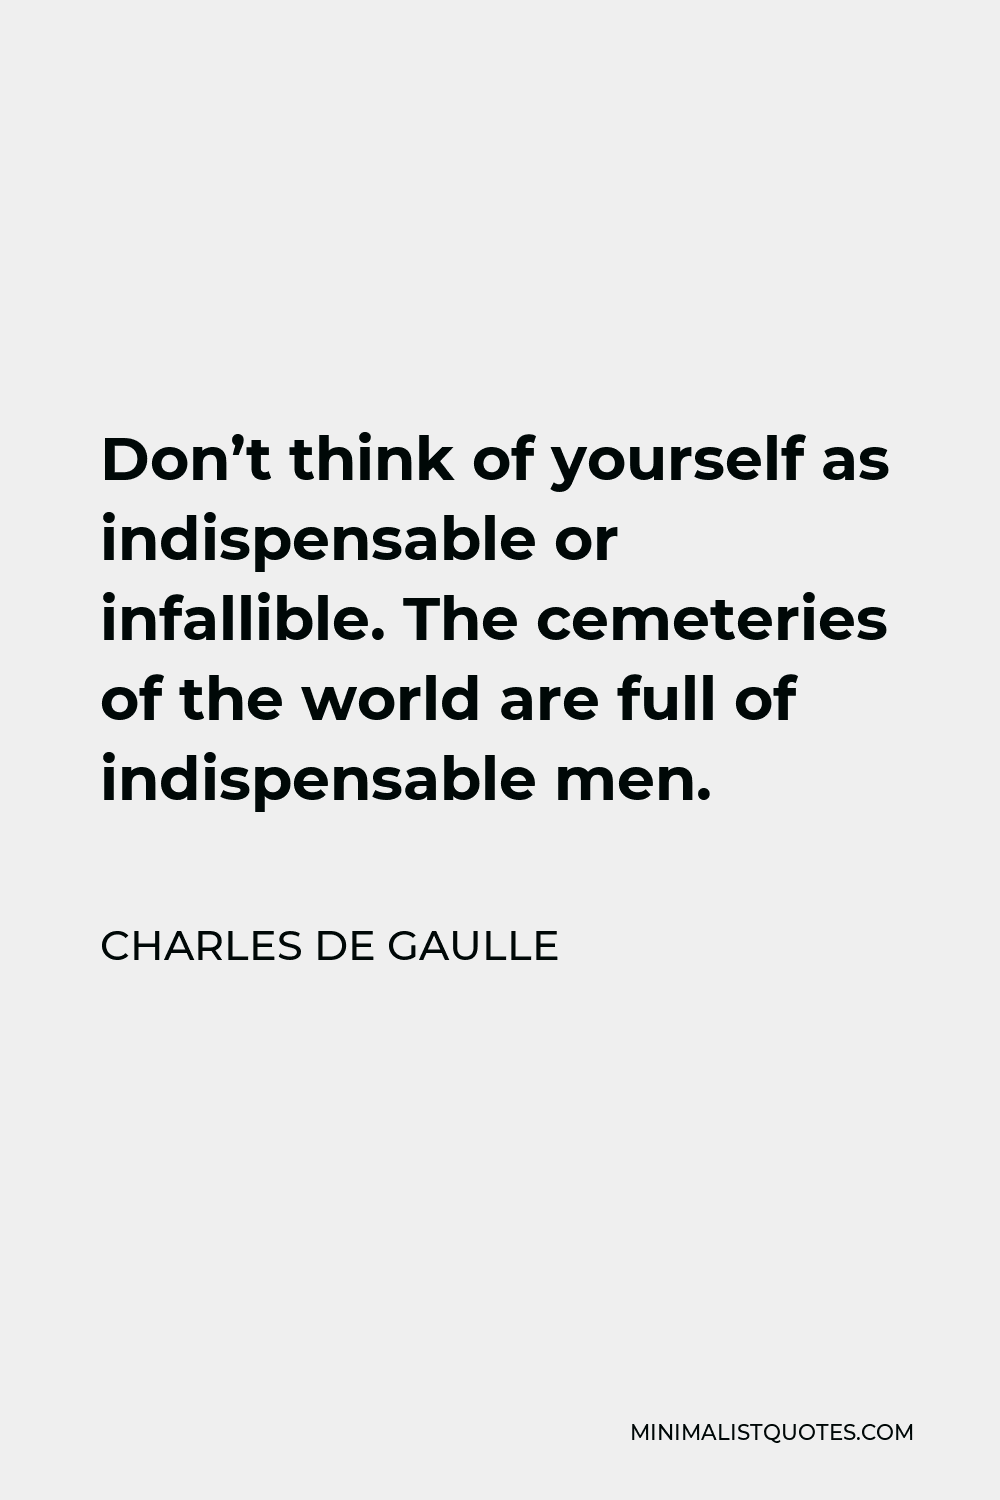 Charles de Gaulle Quote - Don’t think of yourself as indispensable or infallible. The cemeteries of the world are full of indispensable men.